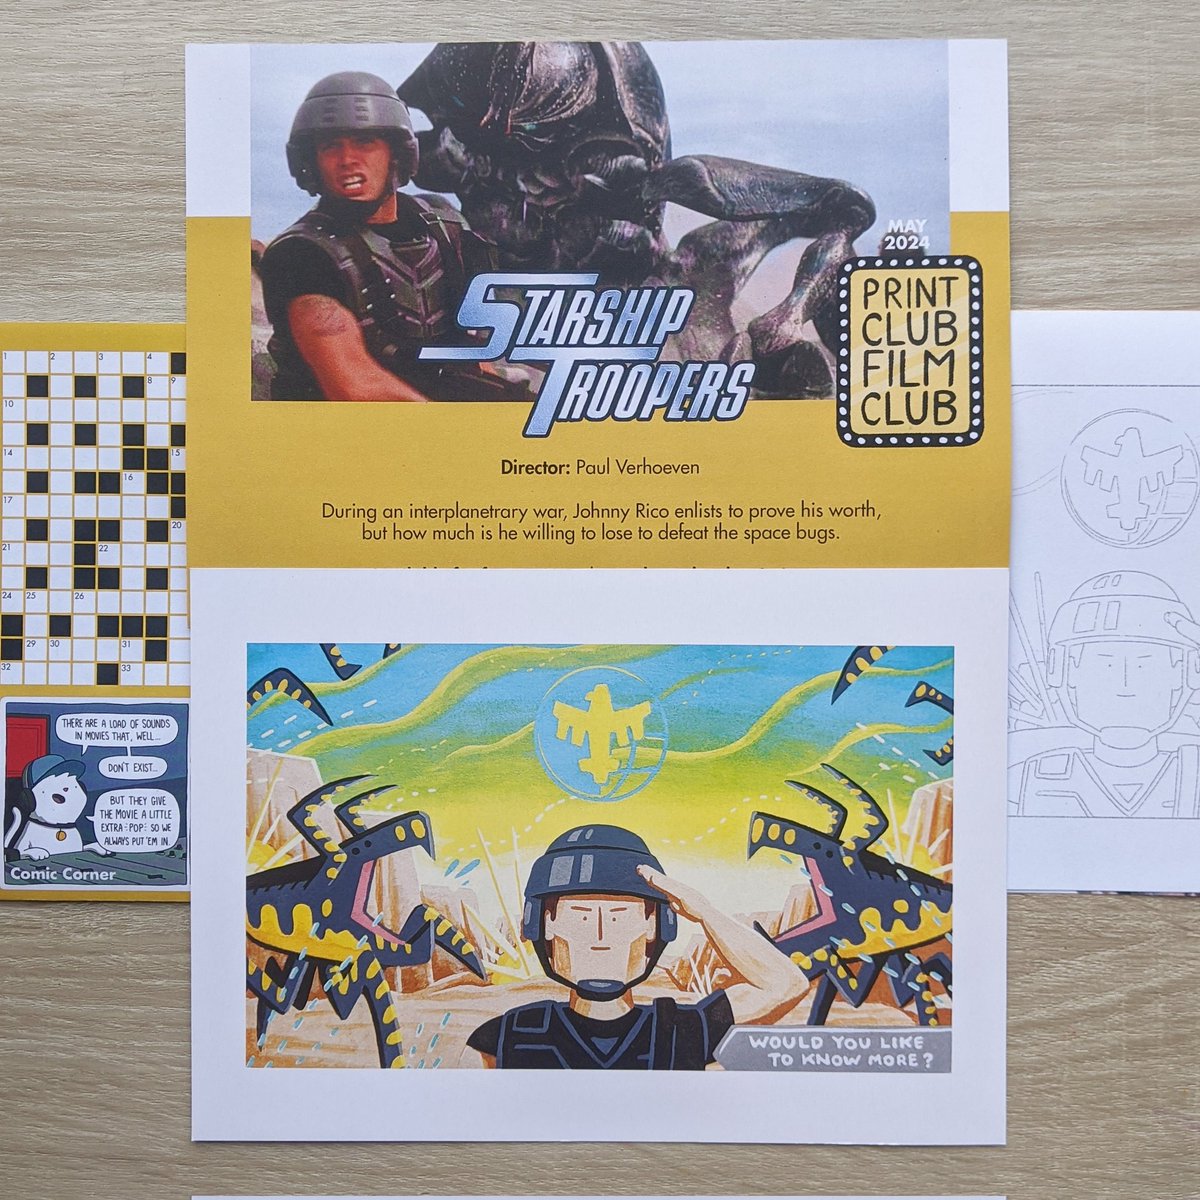 Starship Troopers is next month's Film Club pick. It's a lovely community and members get loads of things including a print of these cute bugs 🥺 patreon.com/jameschapman